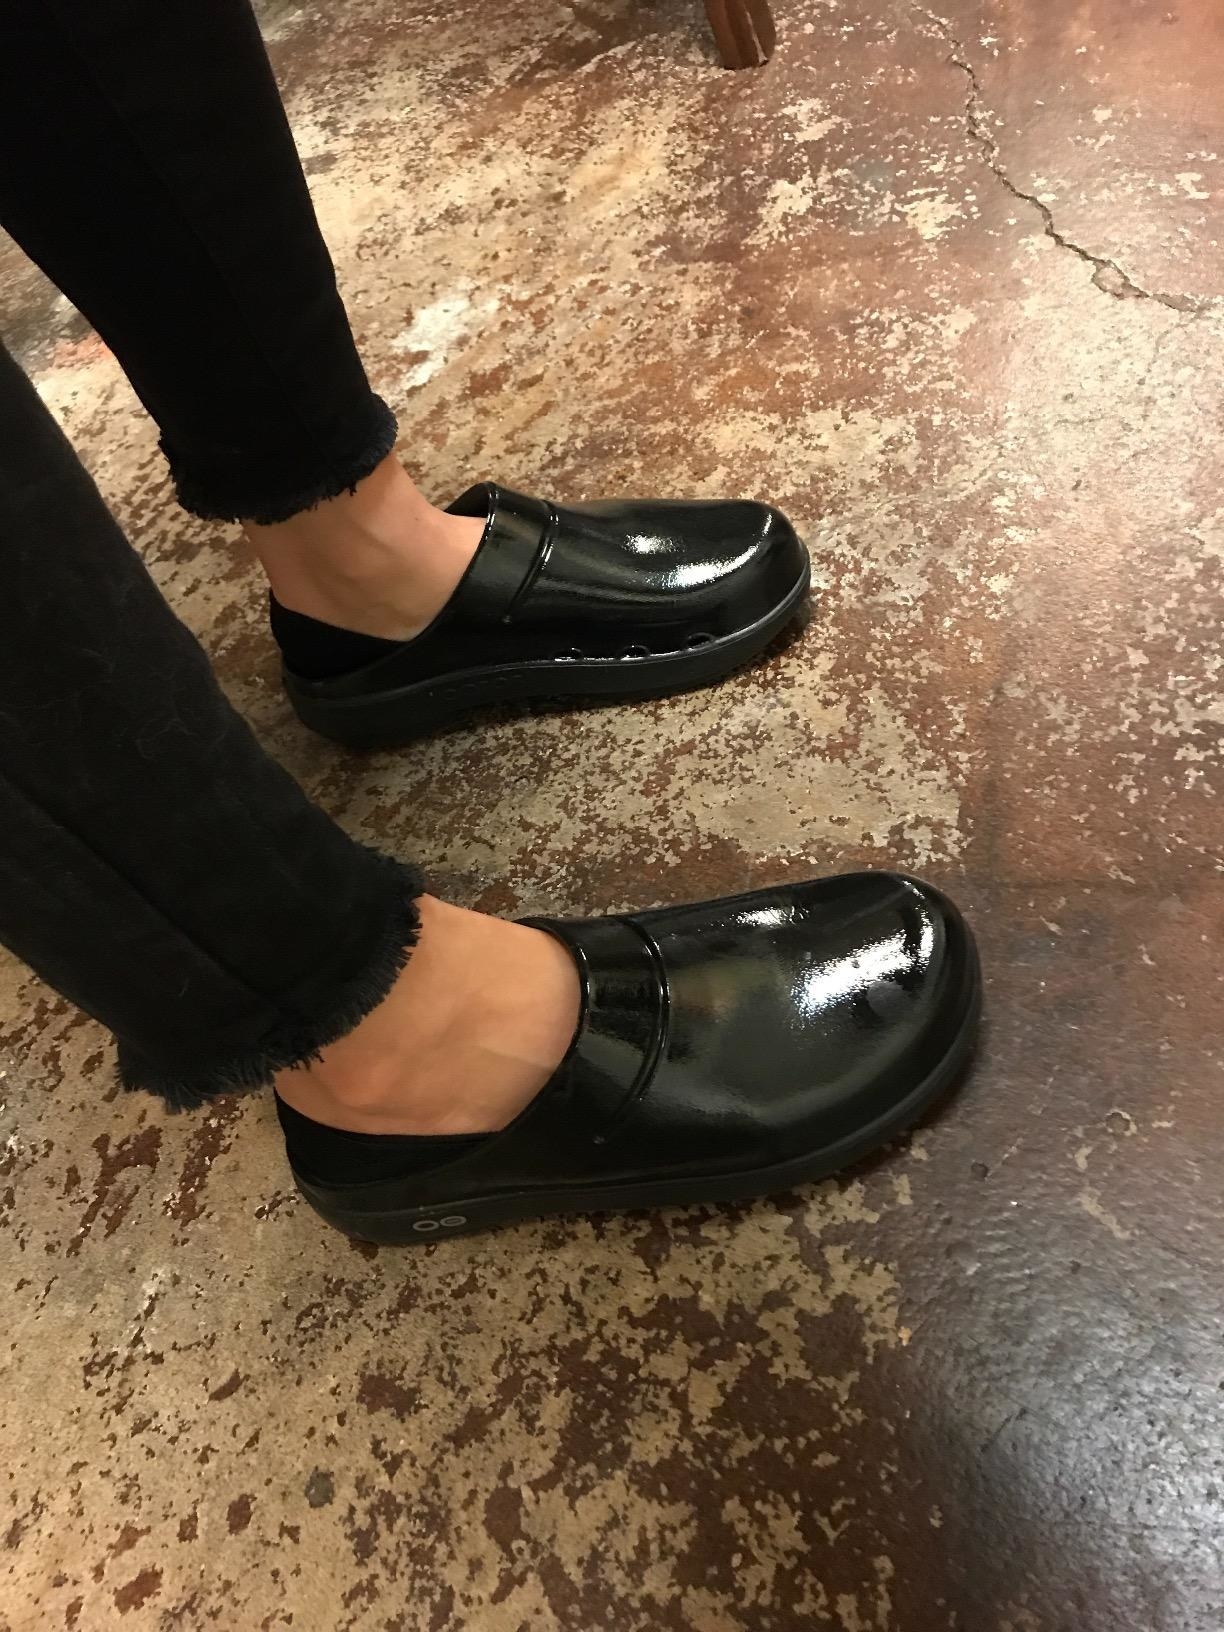 Reviewer in the shiny black clogs